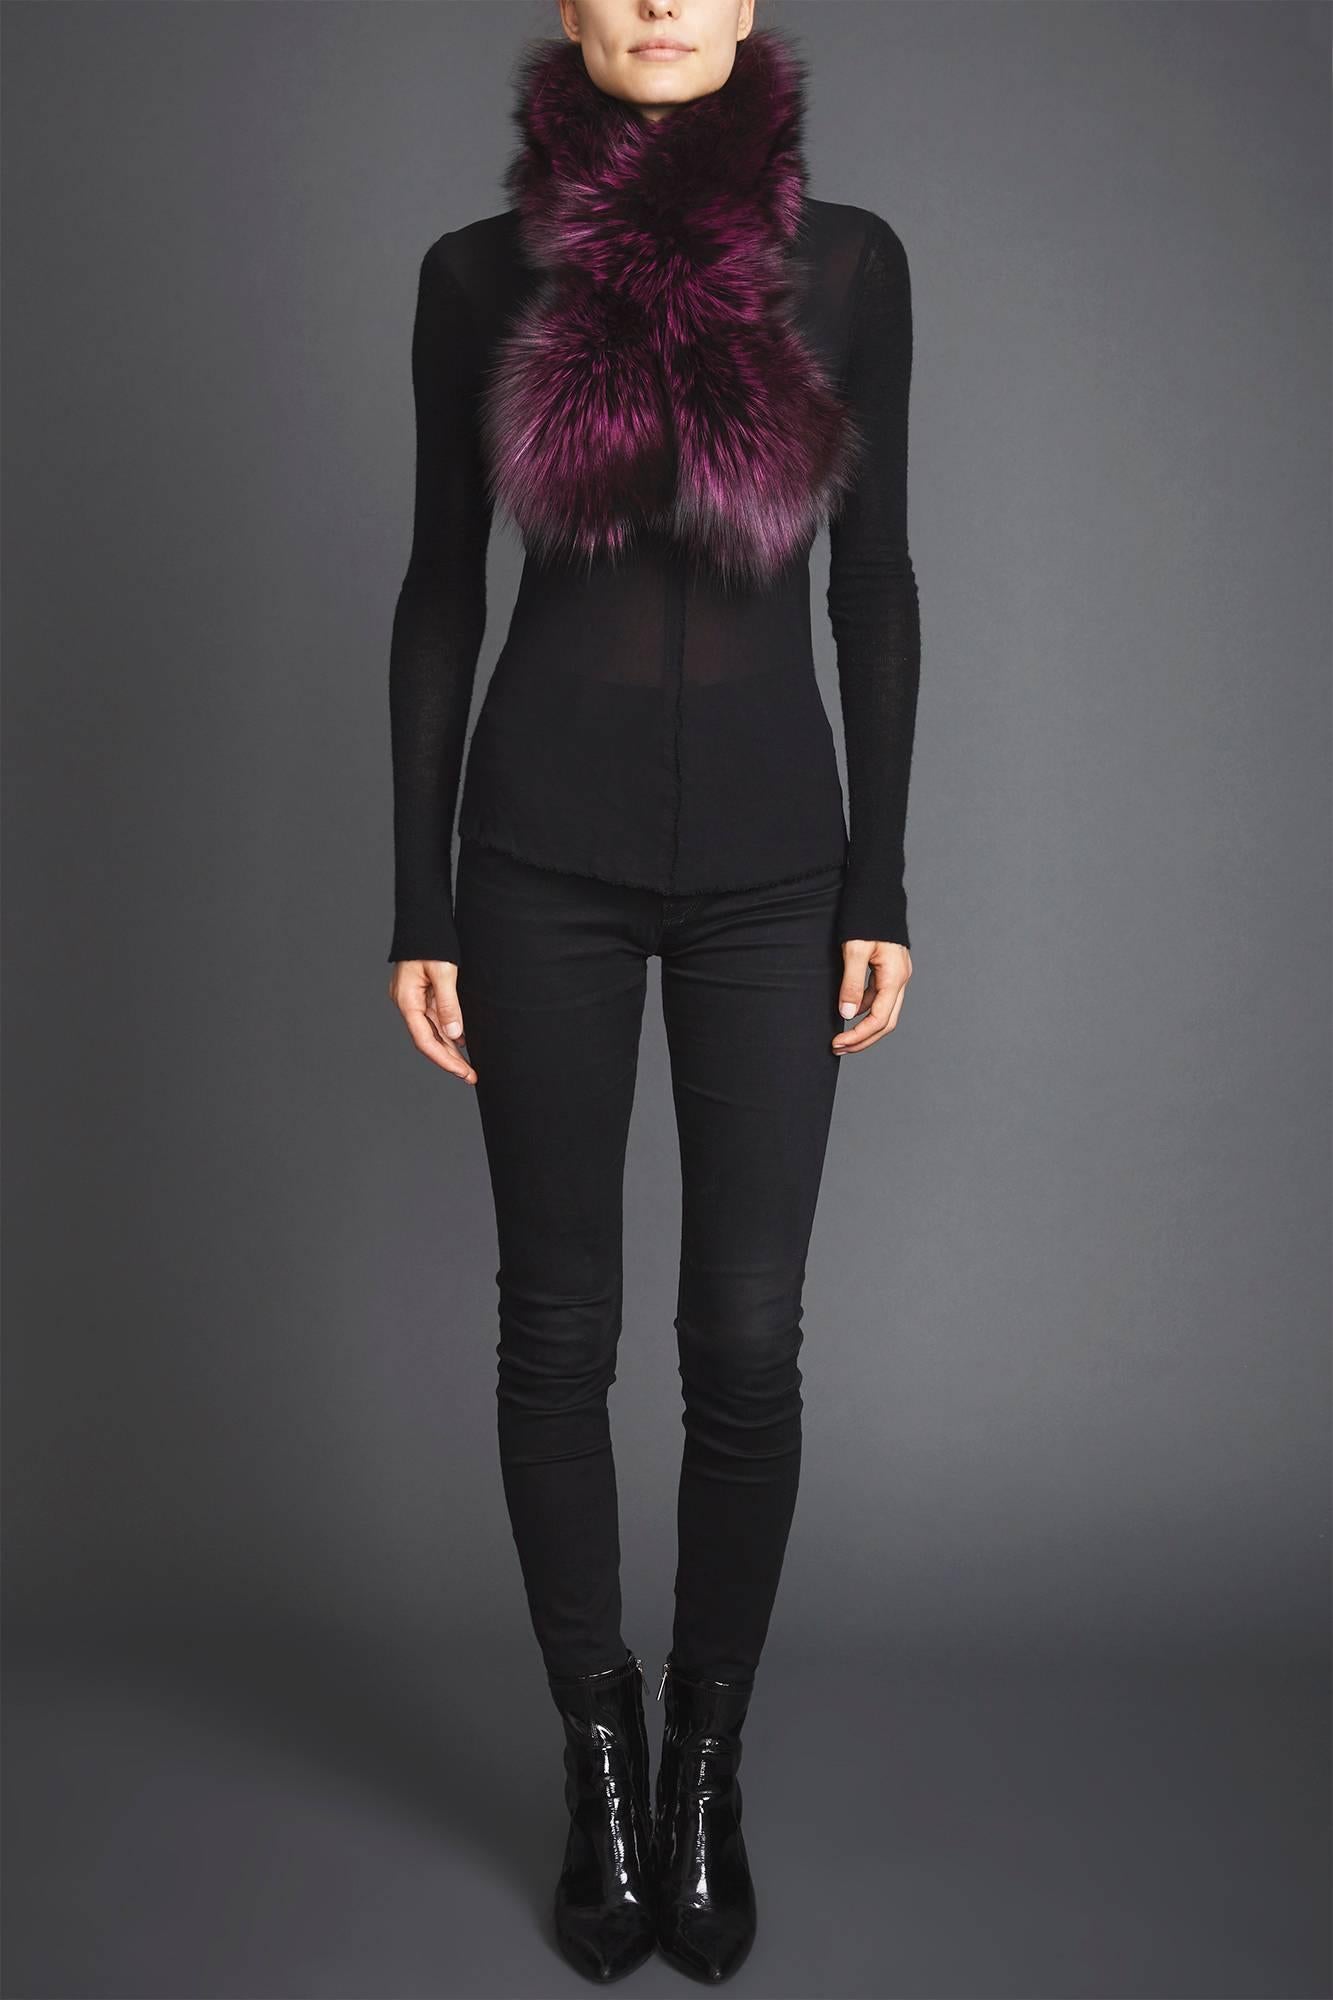 Lapel Cross-through Collar Stole Scarf in Purple Fox Fur 

The Lapel Cross-through Collar is Verheyen London’s casual everyday design, which is perfectly shaped to wear over any outfit.  Designed for layering, this structured shape, crafted in the